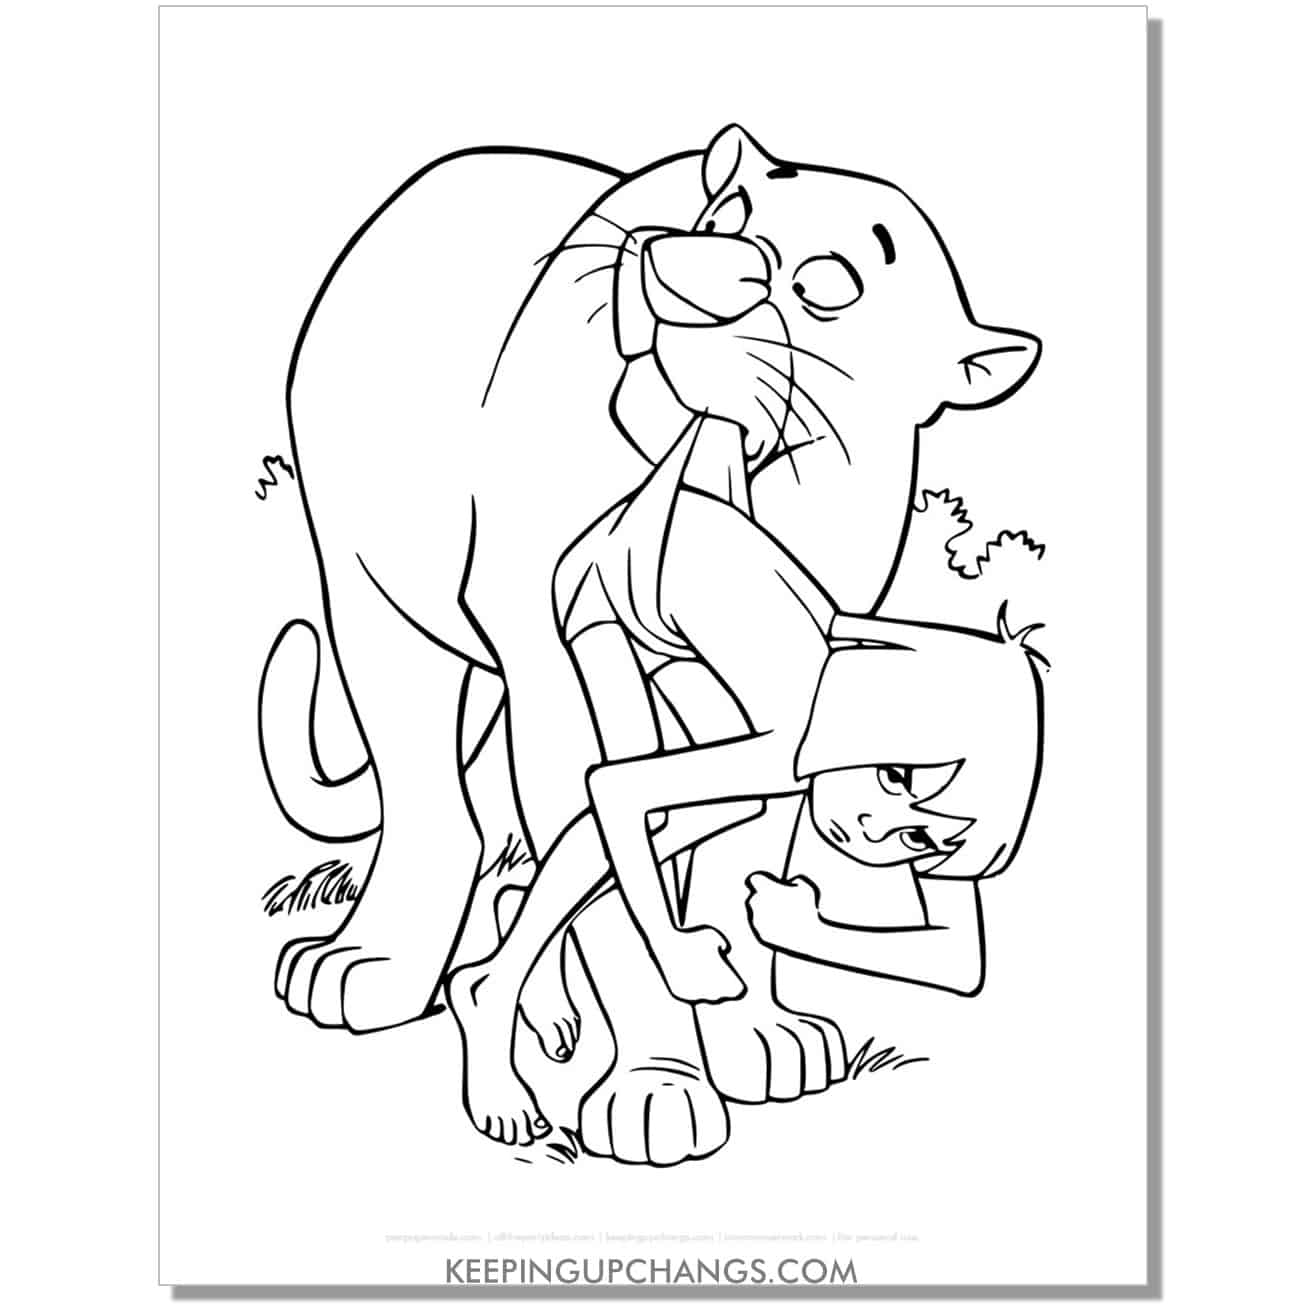 bagheera holds mowgli by pants jungle book coloring page, sheet.